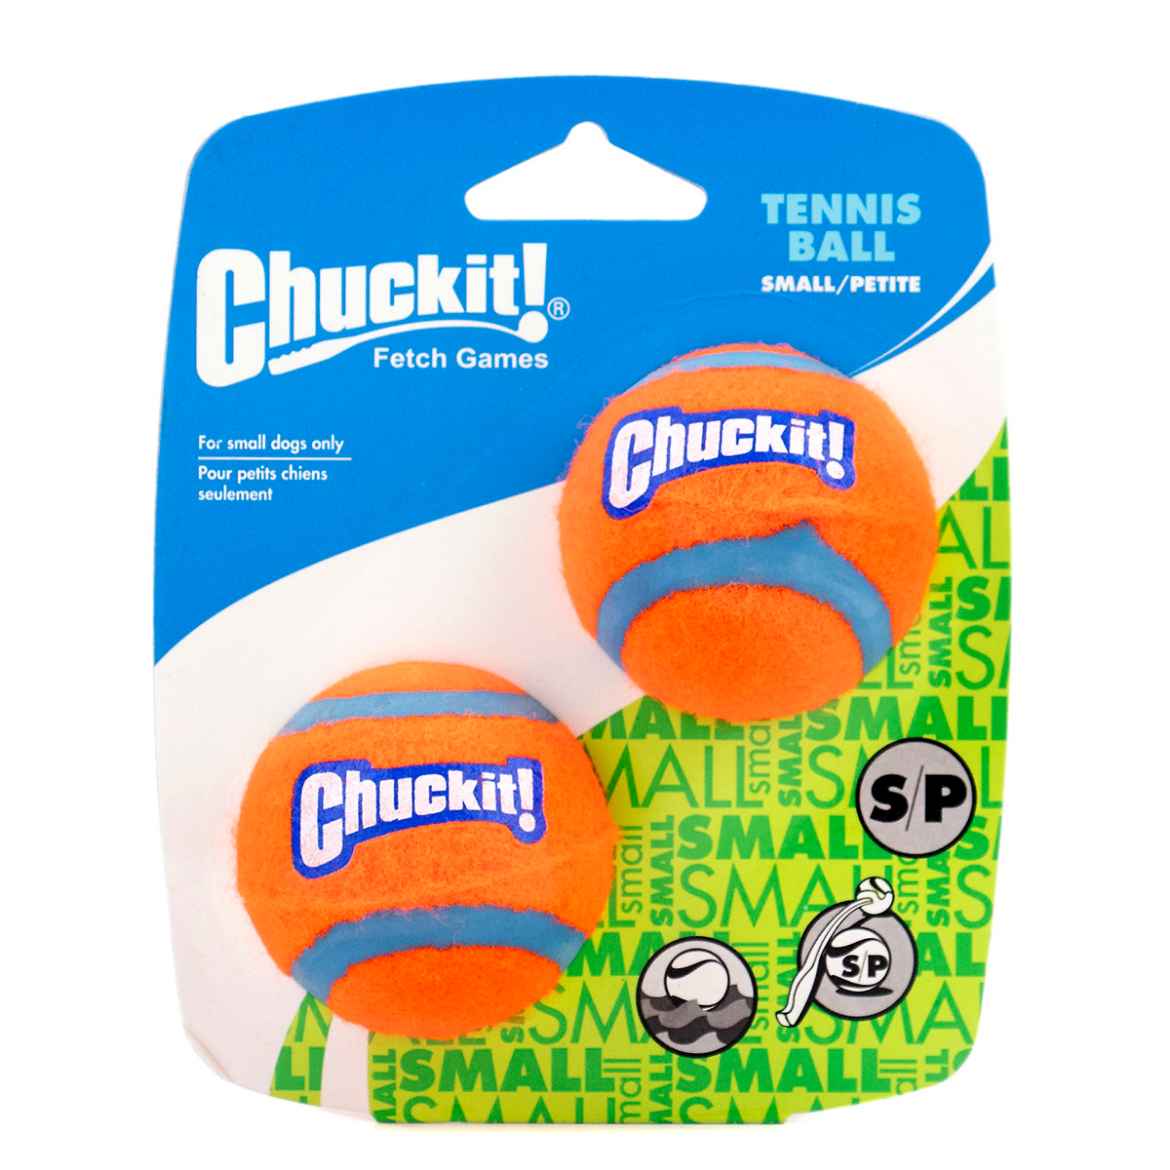 Picture of TOY DOG CHUCKIT MINI Replacement TENNIS BALLS - 2/pkg